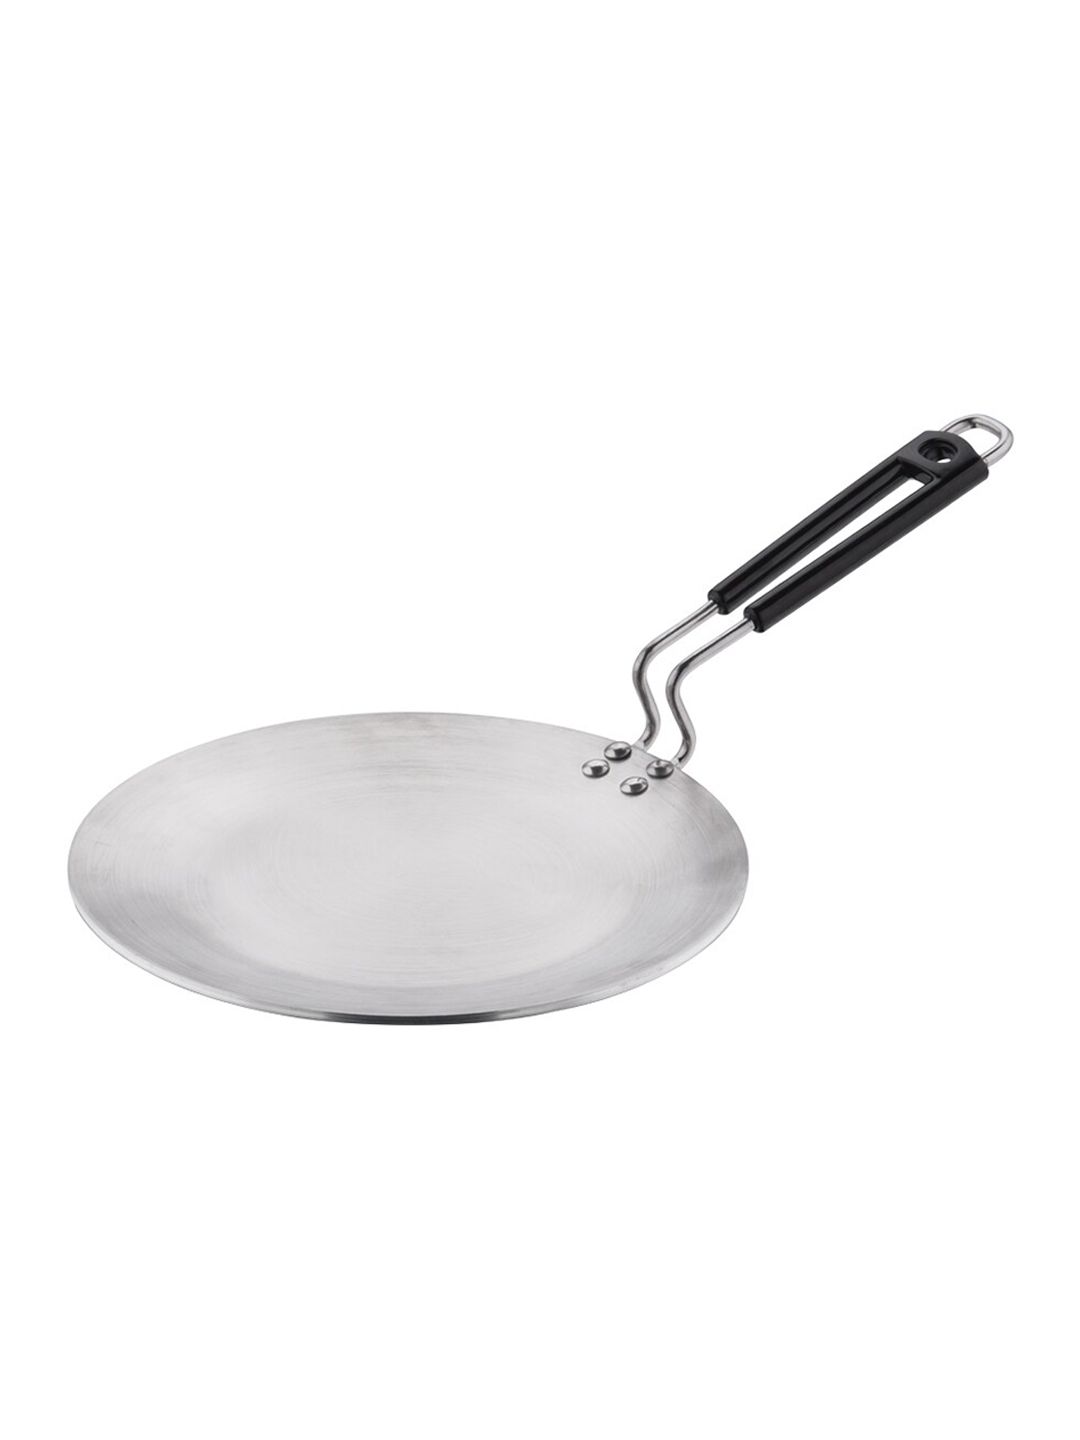 Vinod Silver-Toned Platinum Triply Induction Friendly Stainless Steel Tawa Price in India